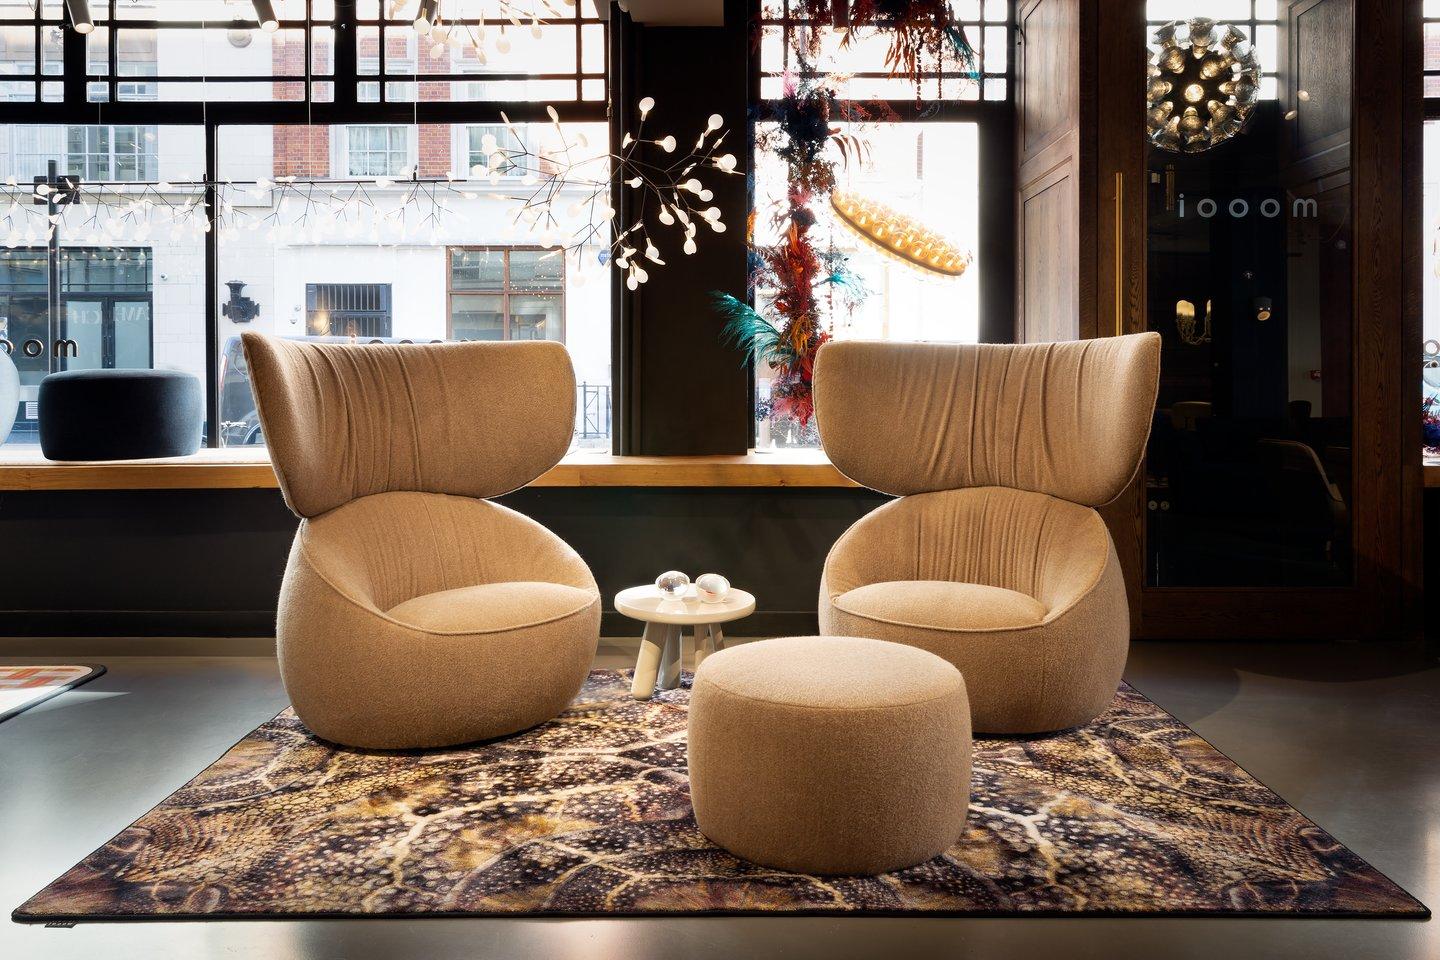 Moooi Pooof Large Pouf in Manga, Green Upholstery In New Condition For Sale In Brooklyn, NY